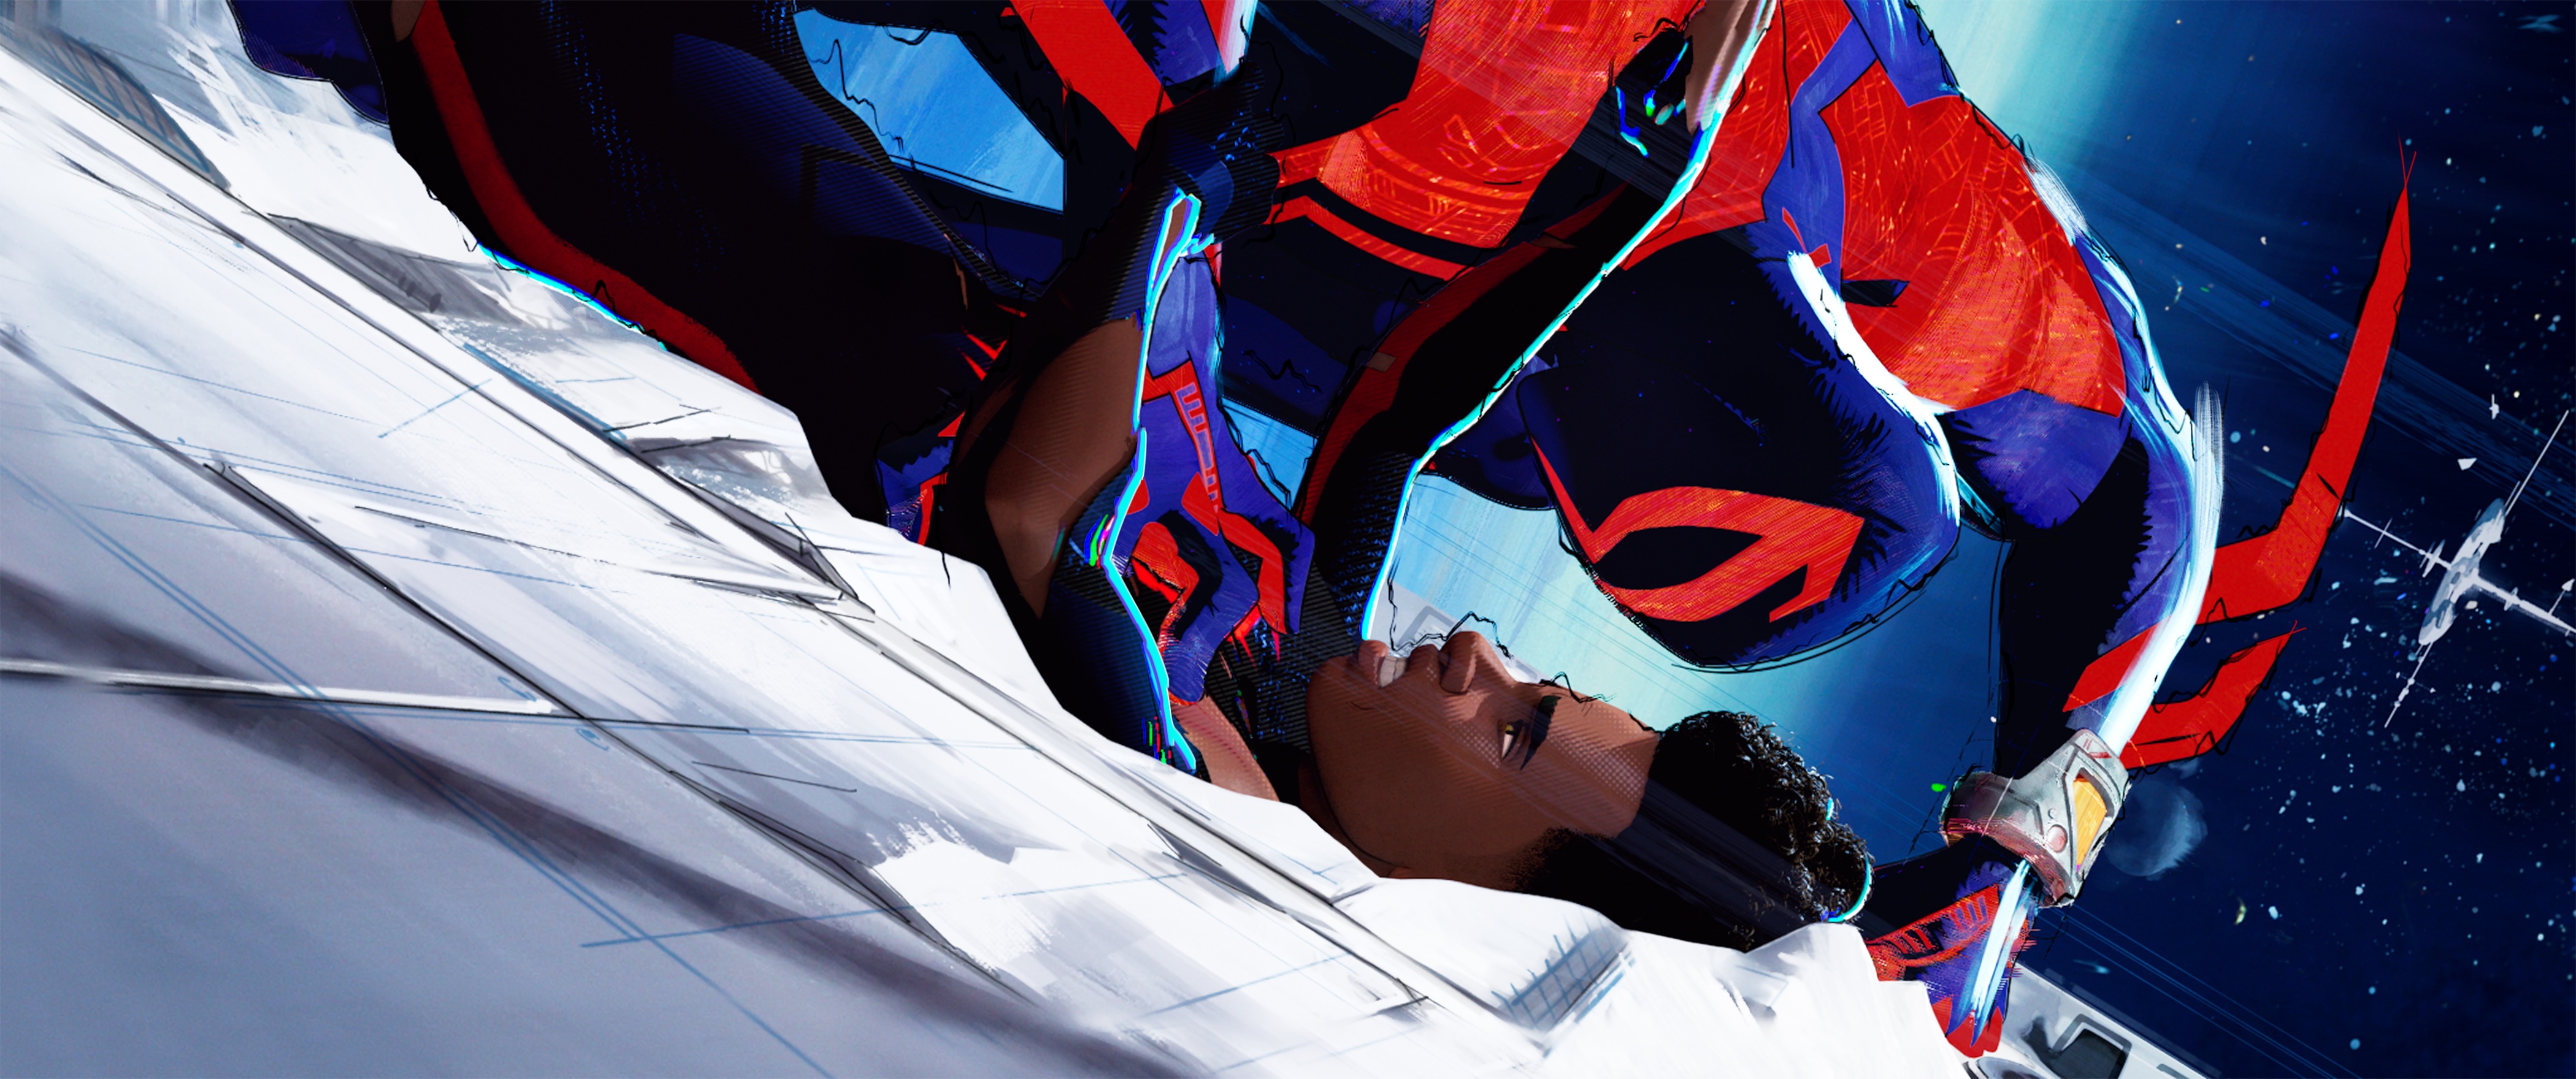 Spider-Man 2099 (Oscar Isaac) and Miles Morales (Shameik Moore) in 'Spider-Man: Across the Spider-Verse' (Courtesy of Sony Pictures Animation)